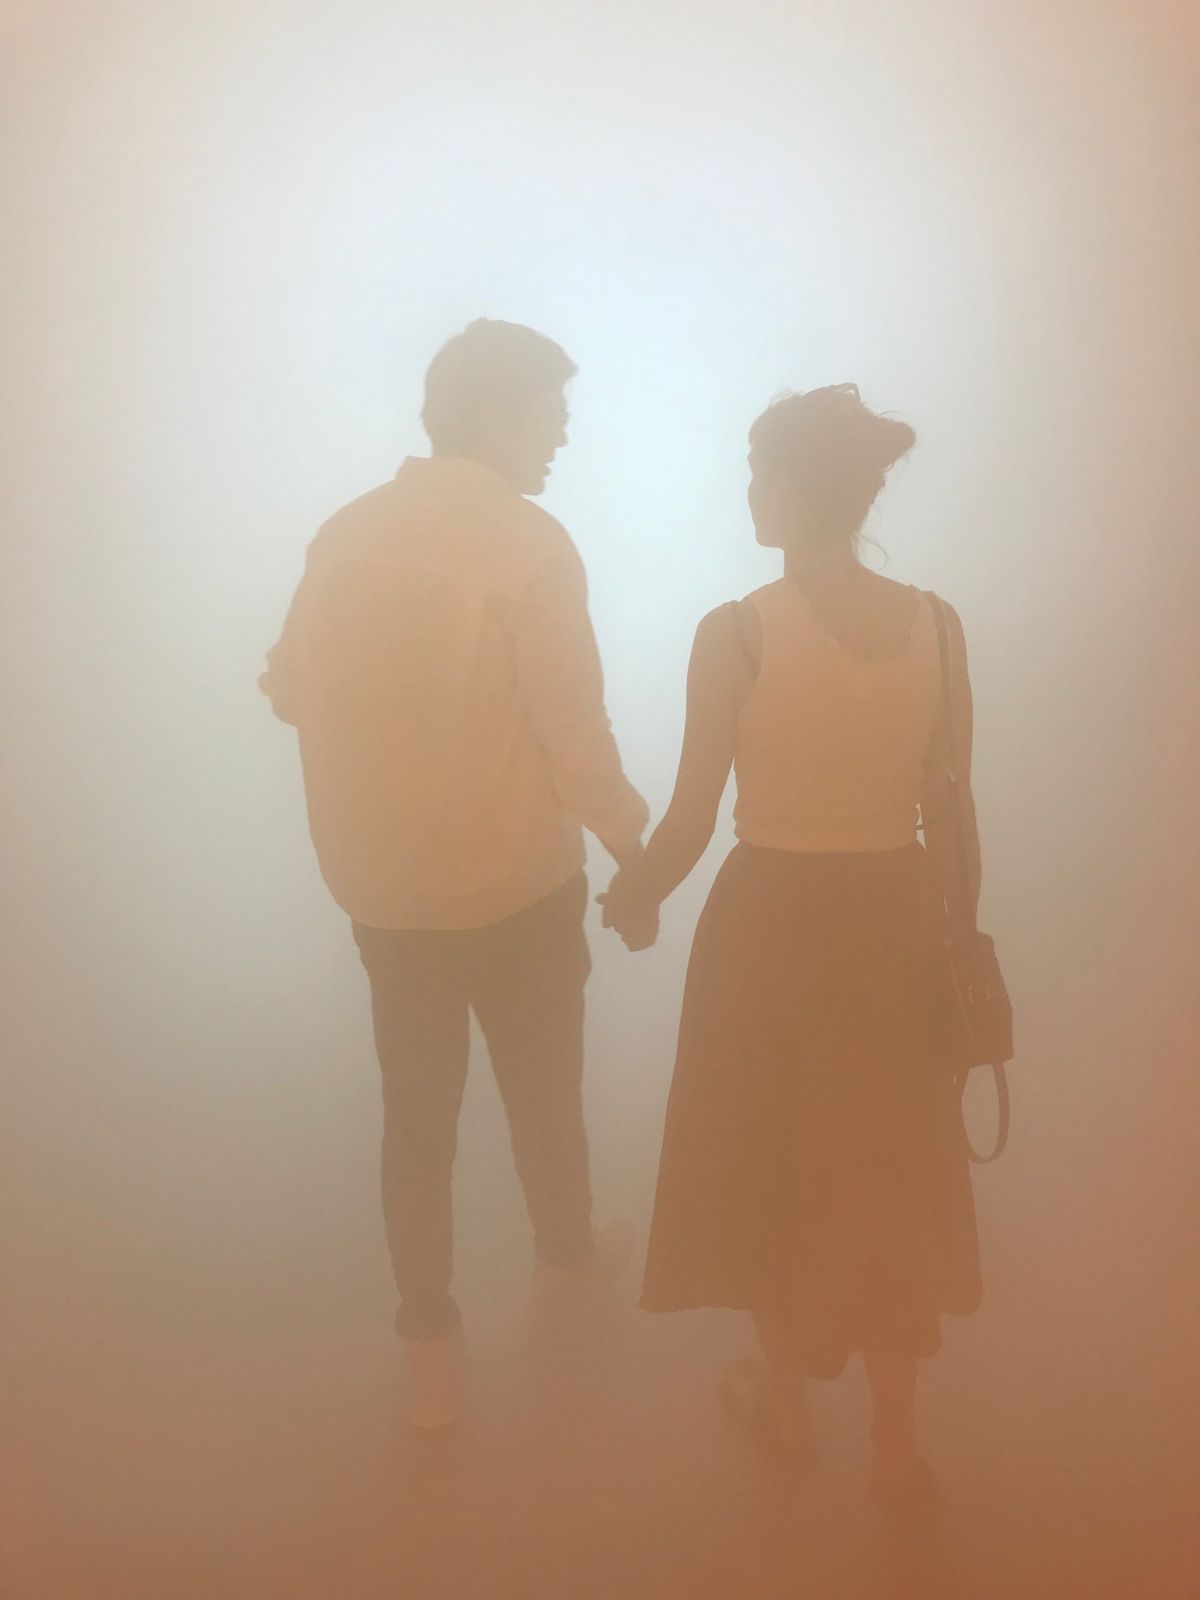 Olafur Eliasson: In Real Life is on show at Tate Modern until 5 January © Eddy Frankel